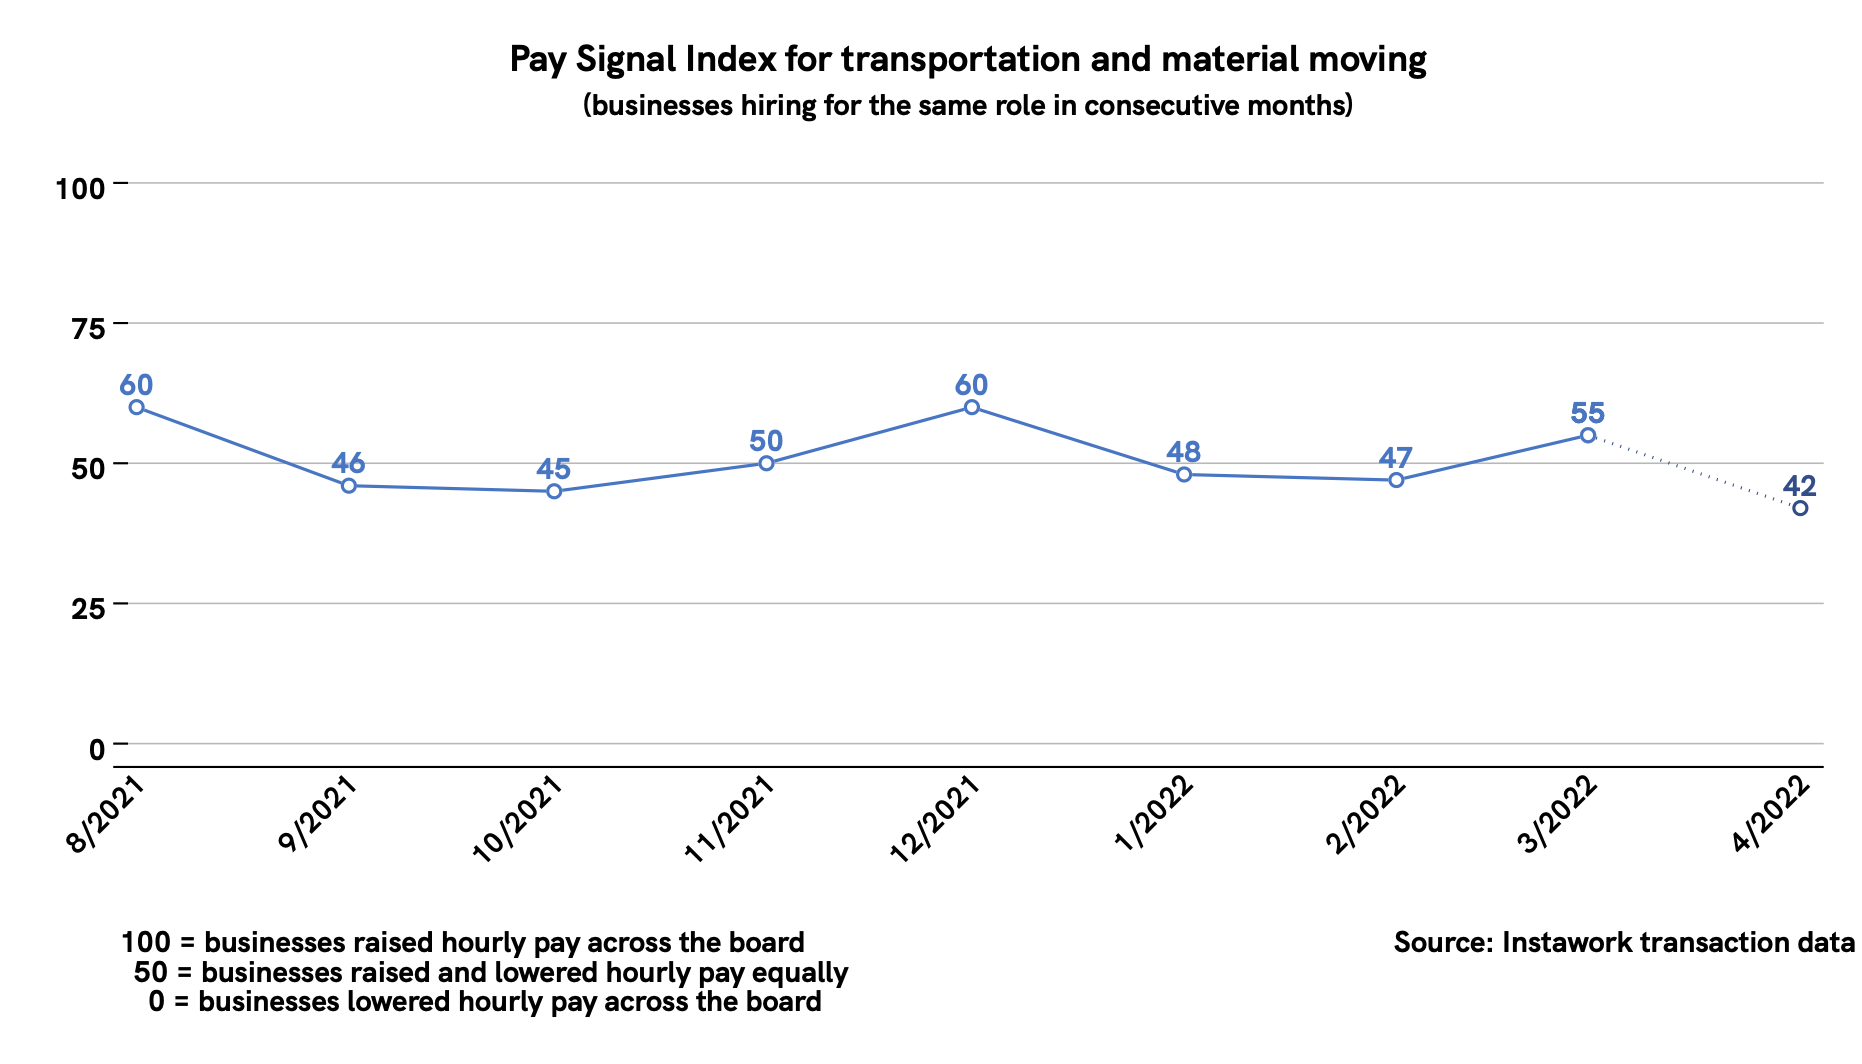 28 Mar 2022 Pay Signal Index for transportation and material moving